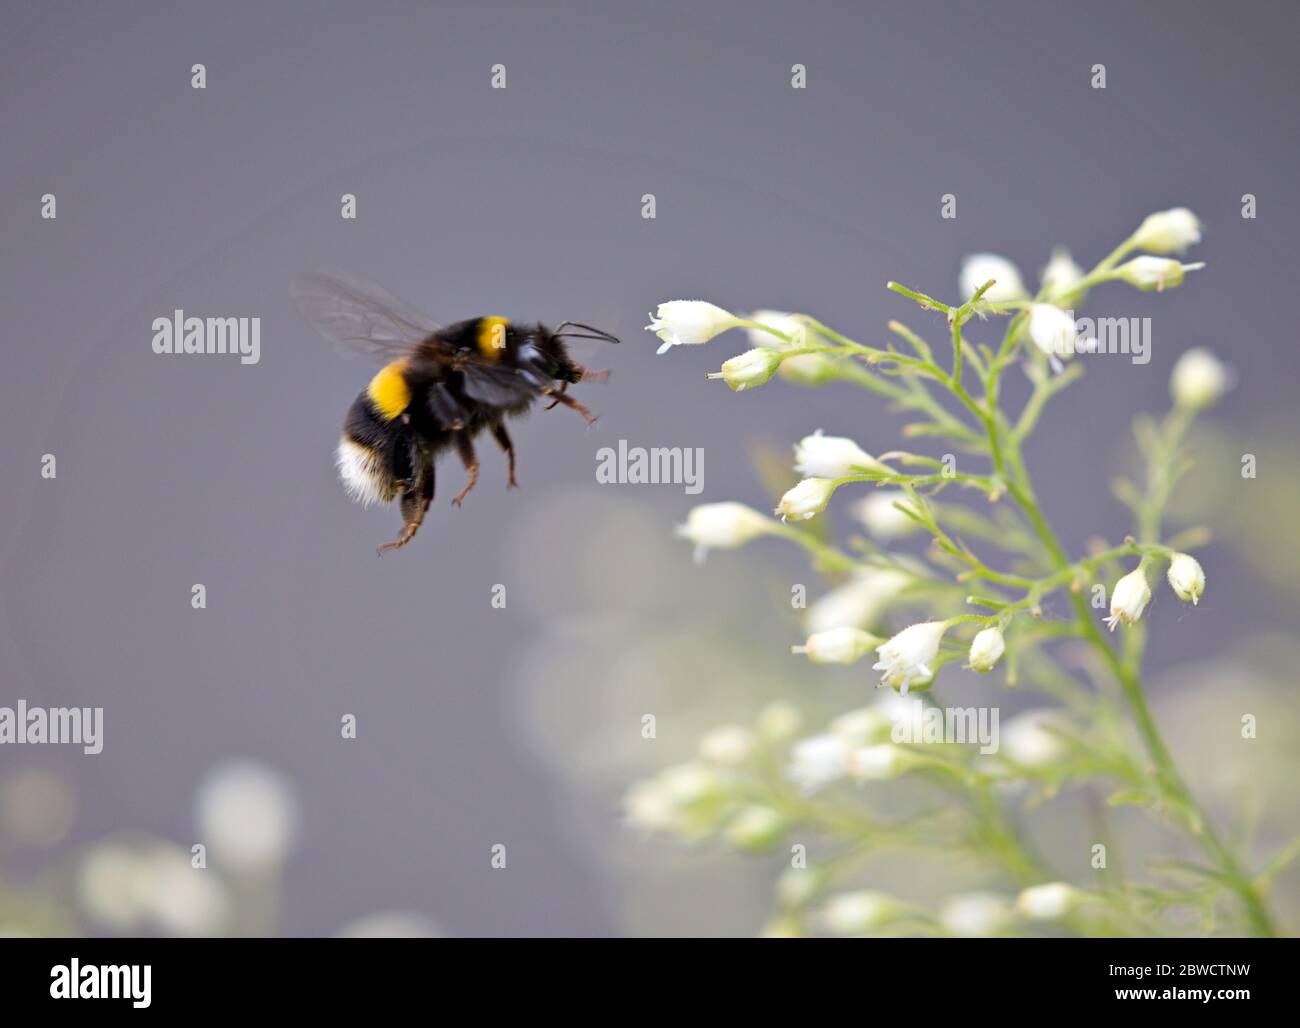 Busy Bee at work Stock Photo